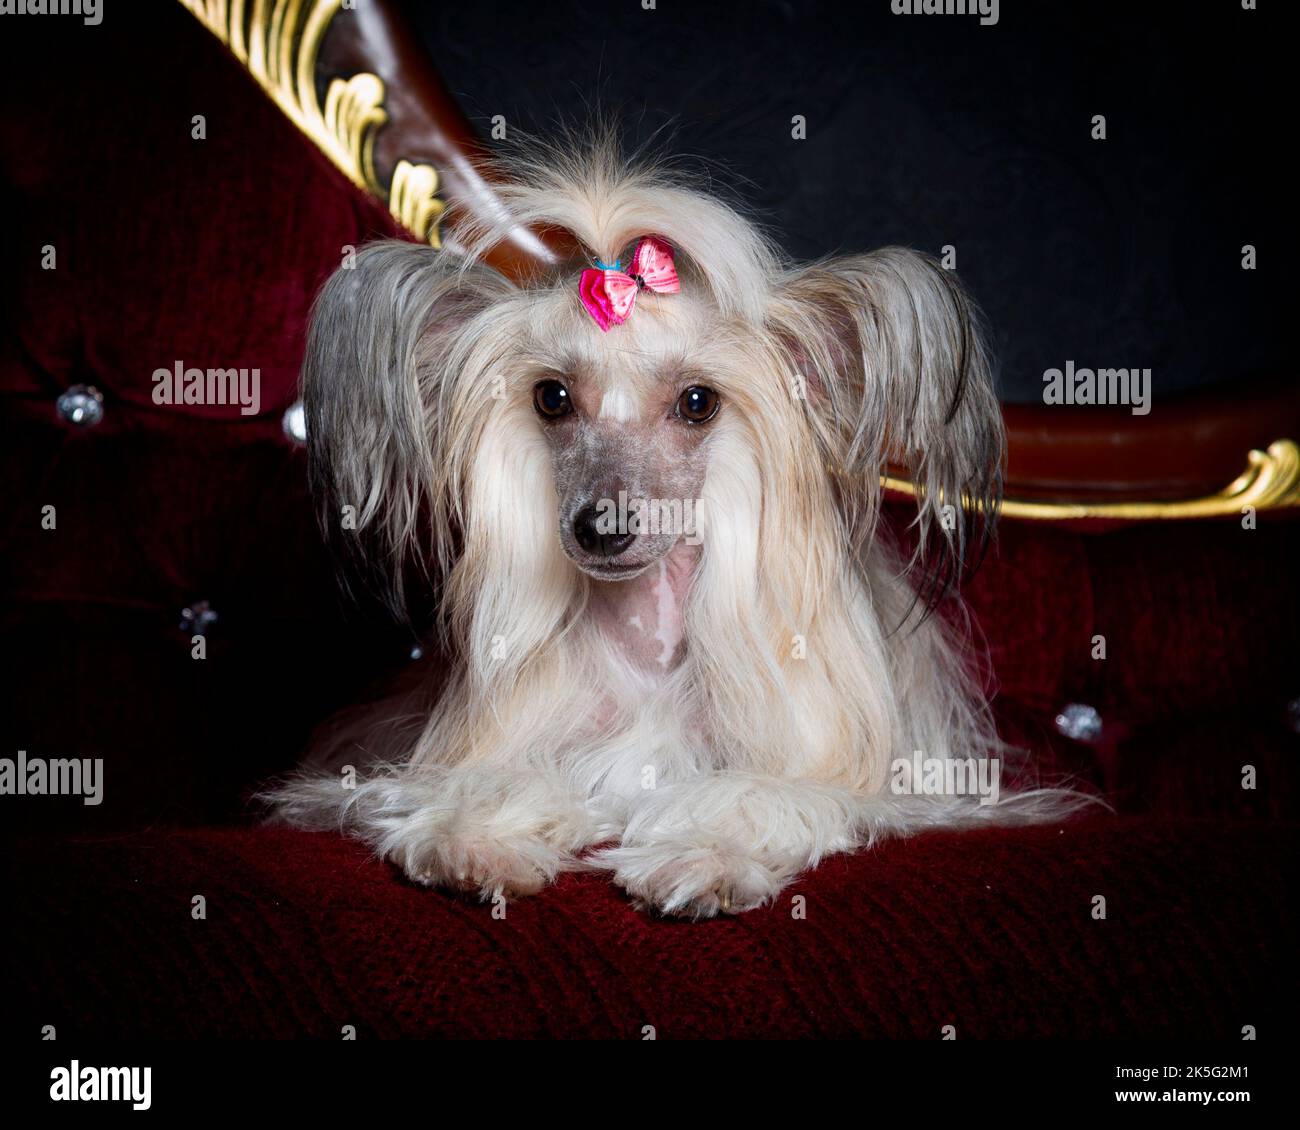 A Picture of a Chinese Crested Dog in a Professional Studio Environment Lying on a Sofa Stock Photo